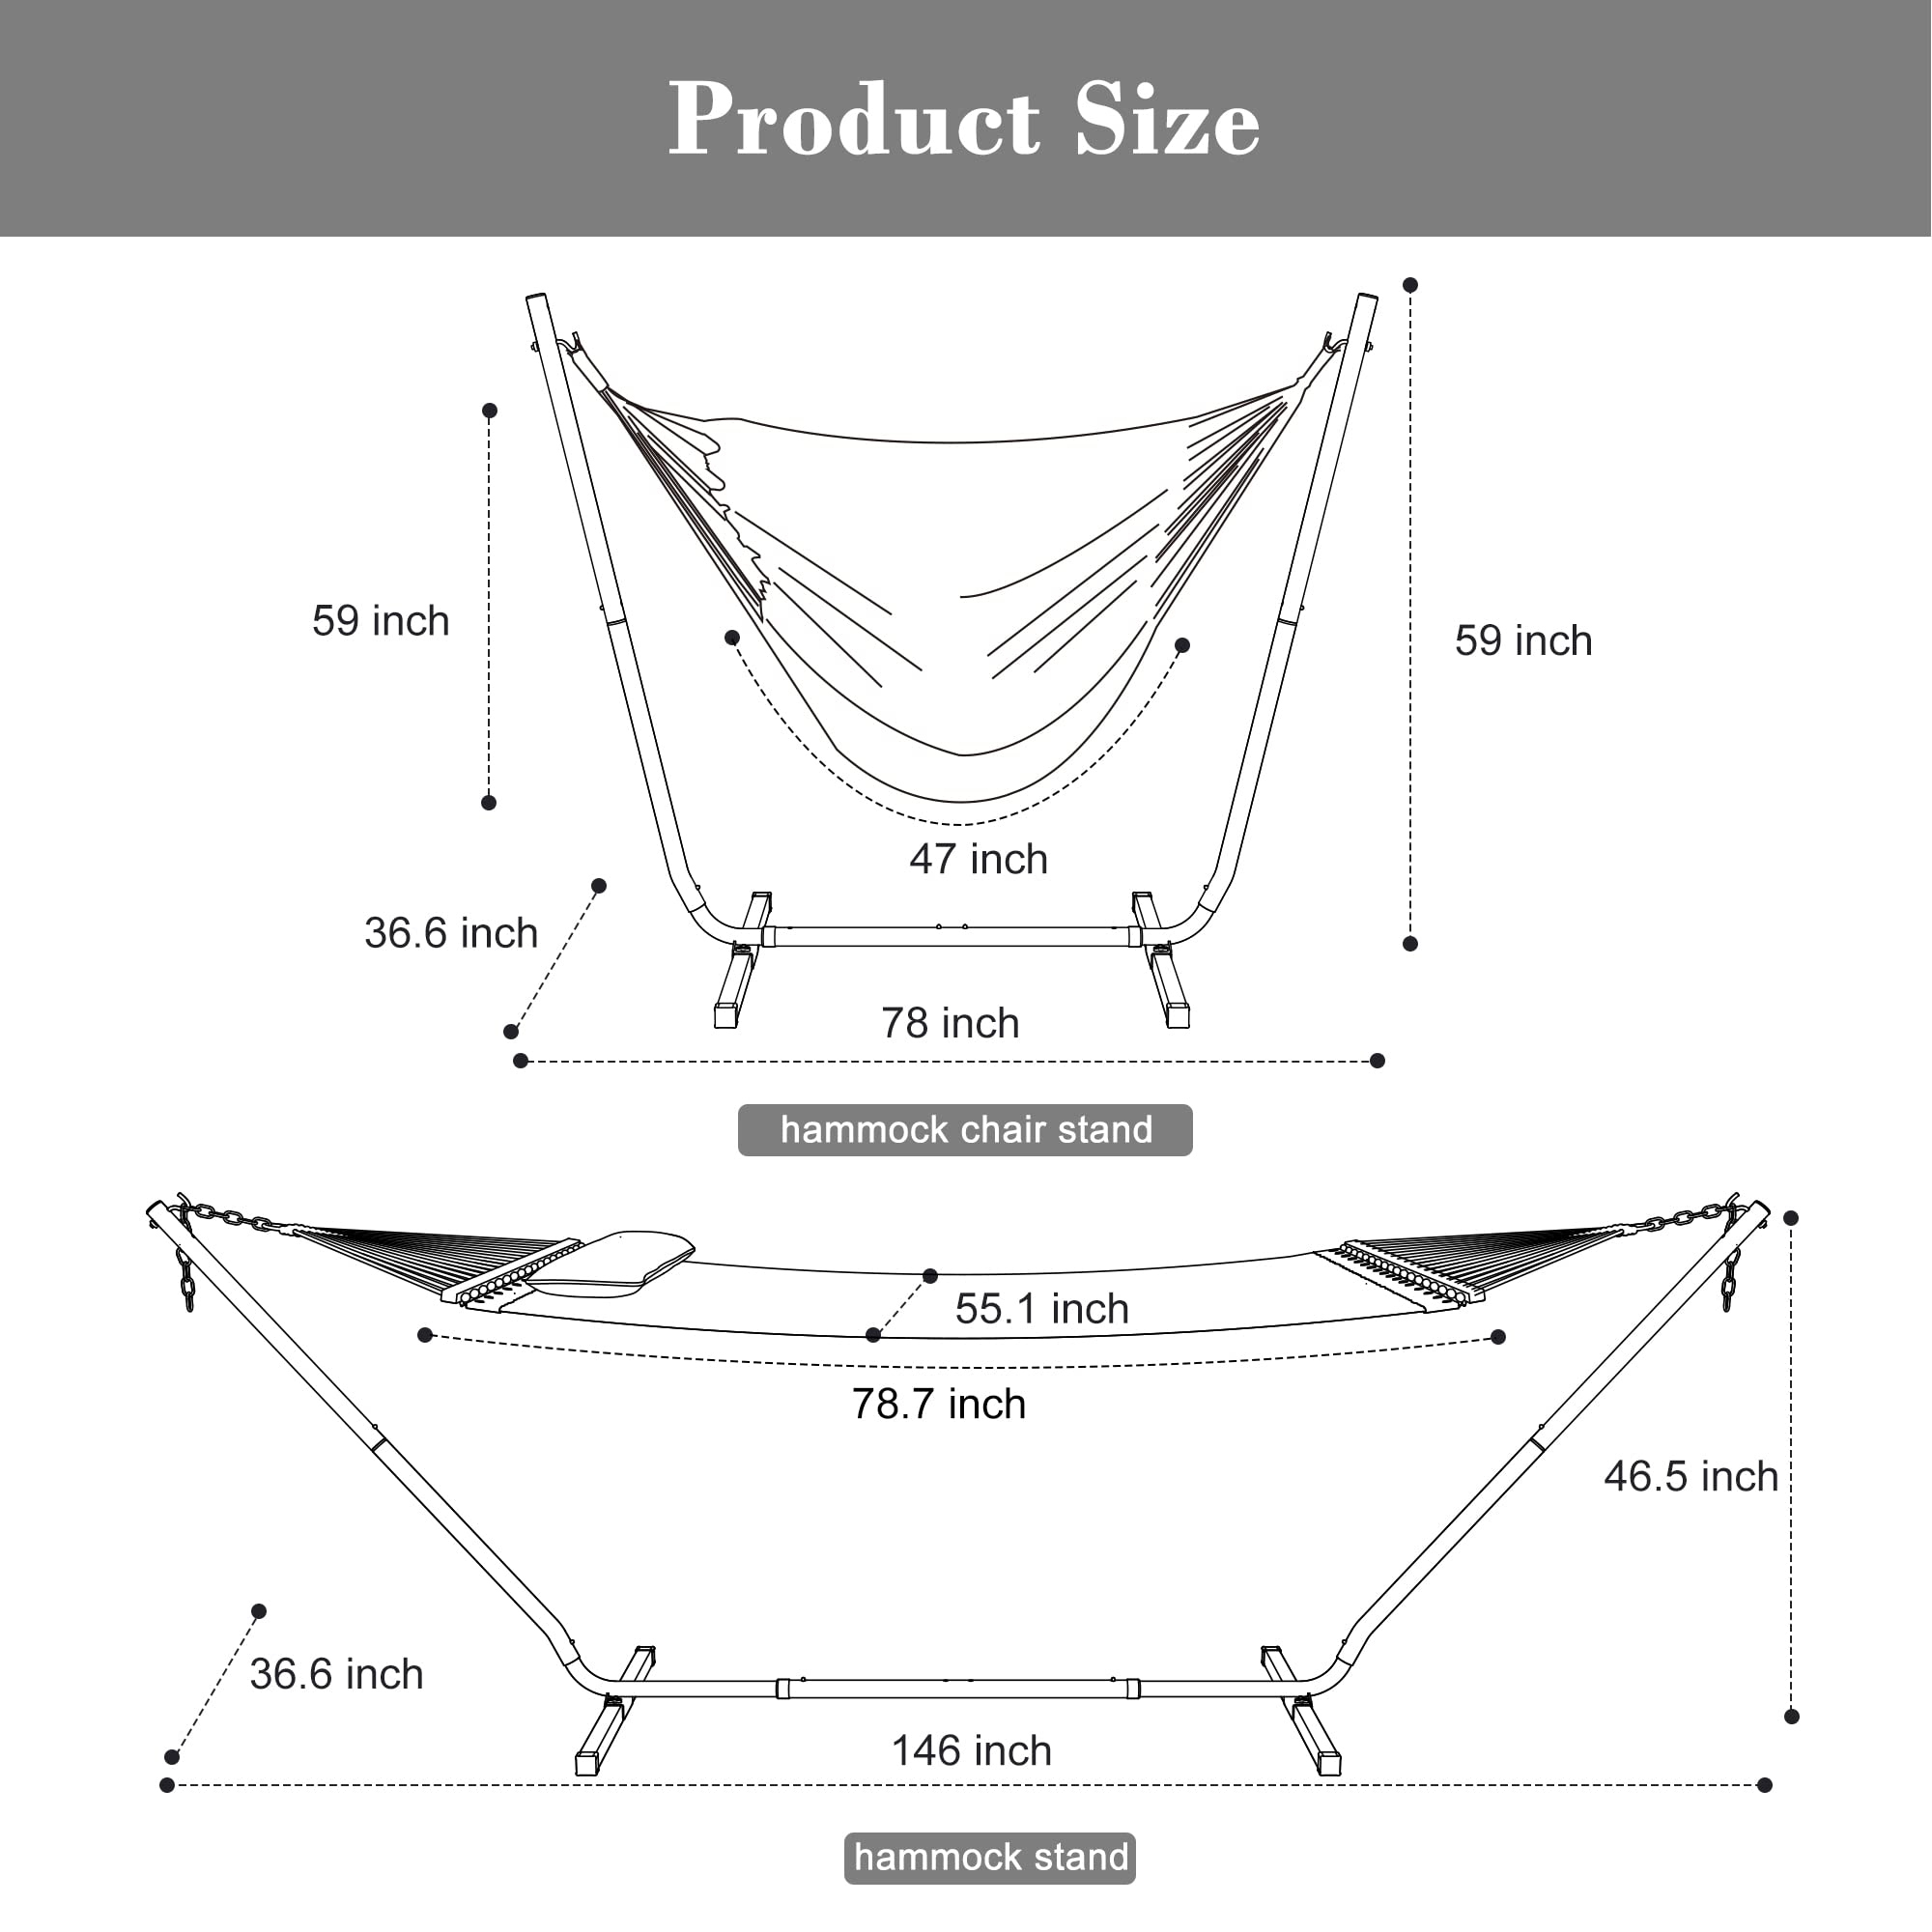 SUNCREAT 2-in-1 Outdoor Patio Hammock with Stand, Large Fluffy Pillow, Free Standing Double Hammock, Patent Pending, Dark Gray